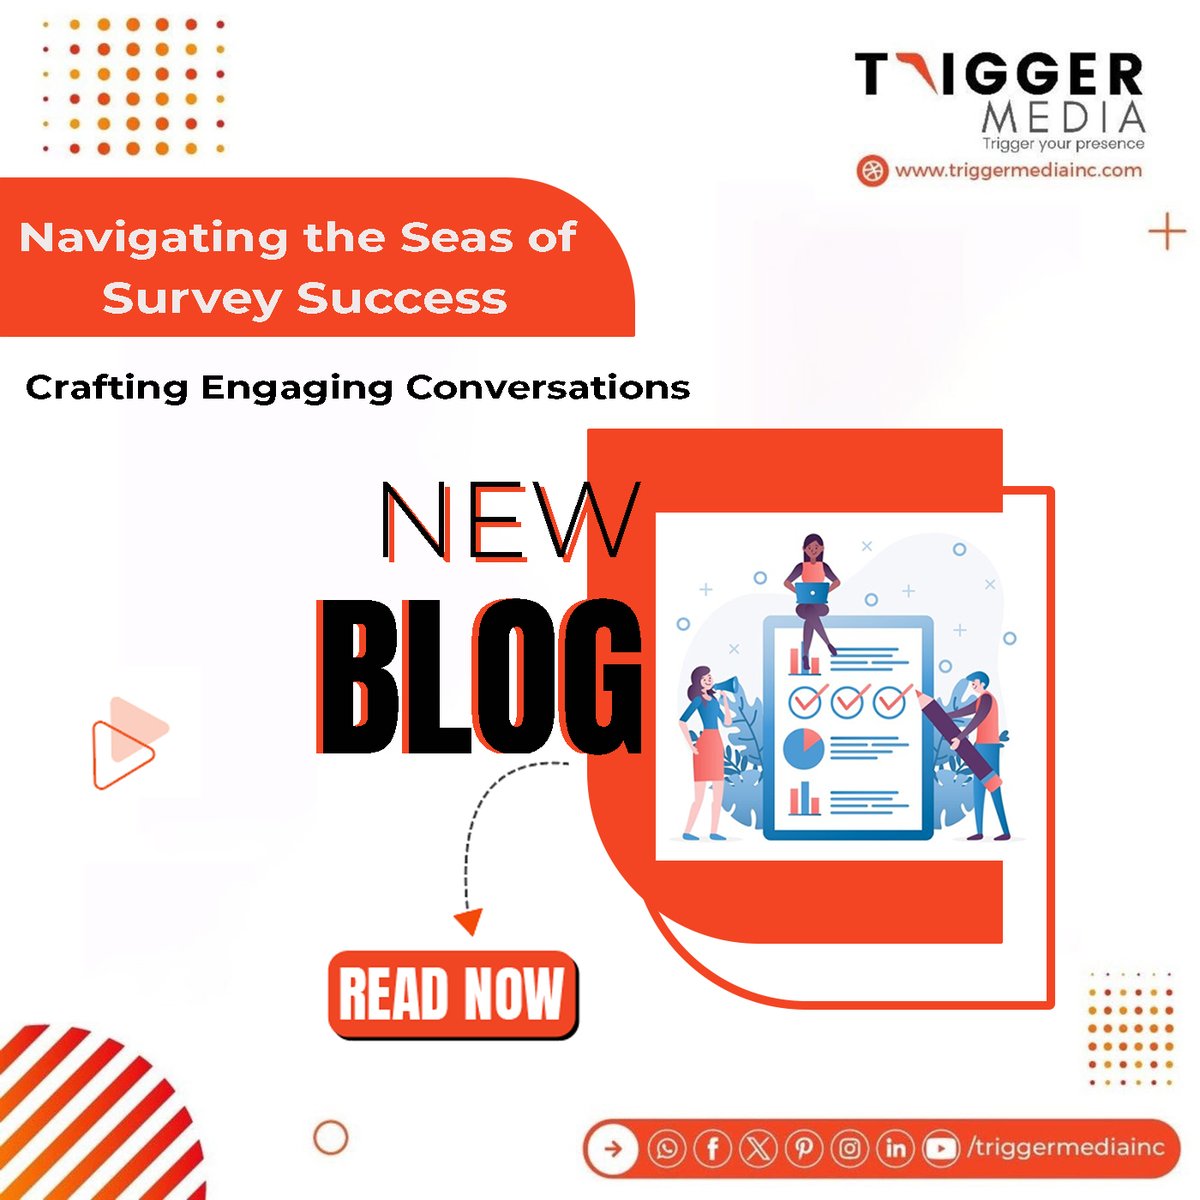 Mastering the Art of #Survey Success: Because #datacollection doesn't have to be a snoozefest! Crafting surveys for insights that truly matter, and people want to engage with. Join our data adventure in this #latestblog 👉triggermediainc.com/blog/Survey-Su…
#SurveySuccess #TriggerMediaInc